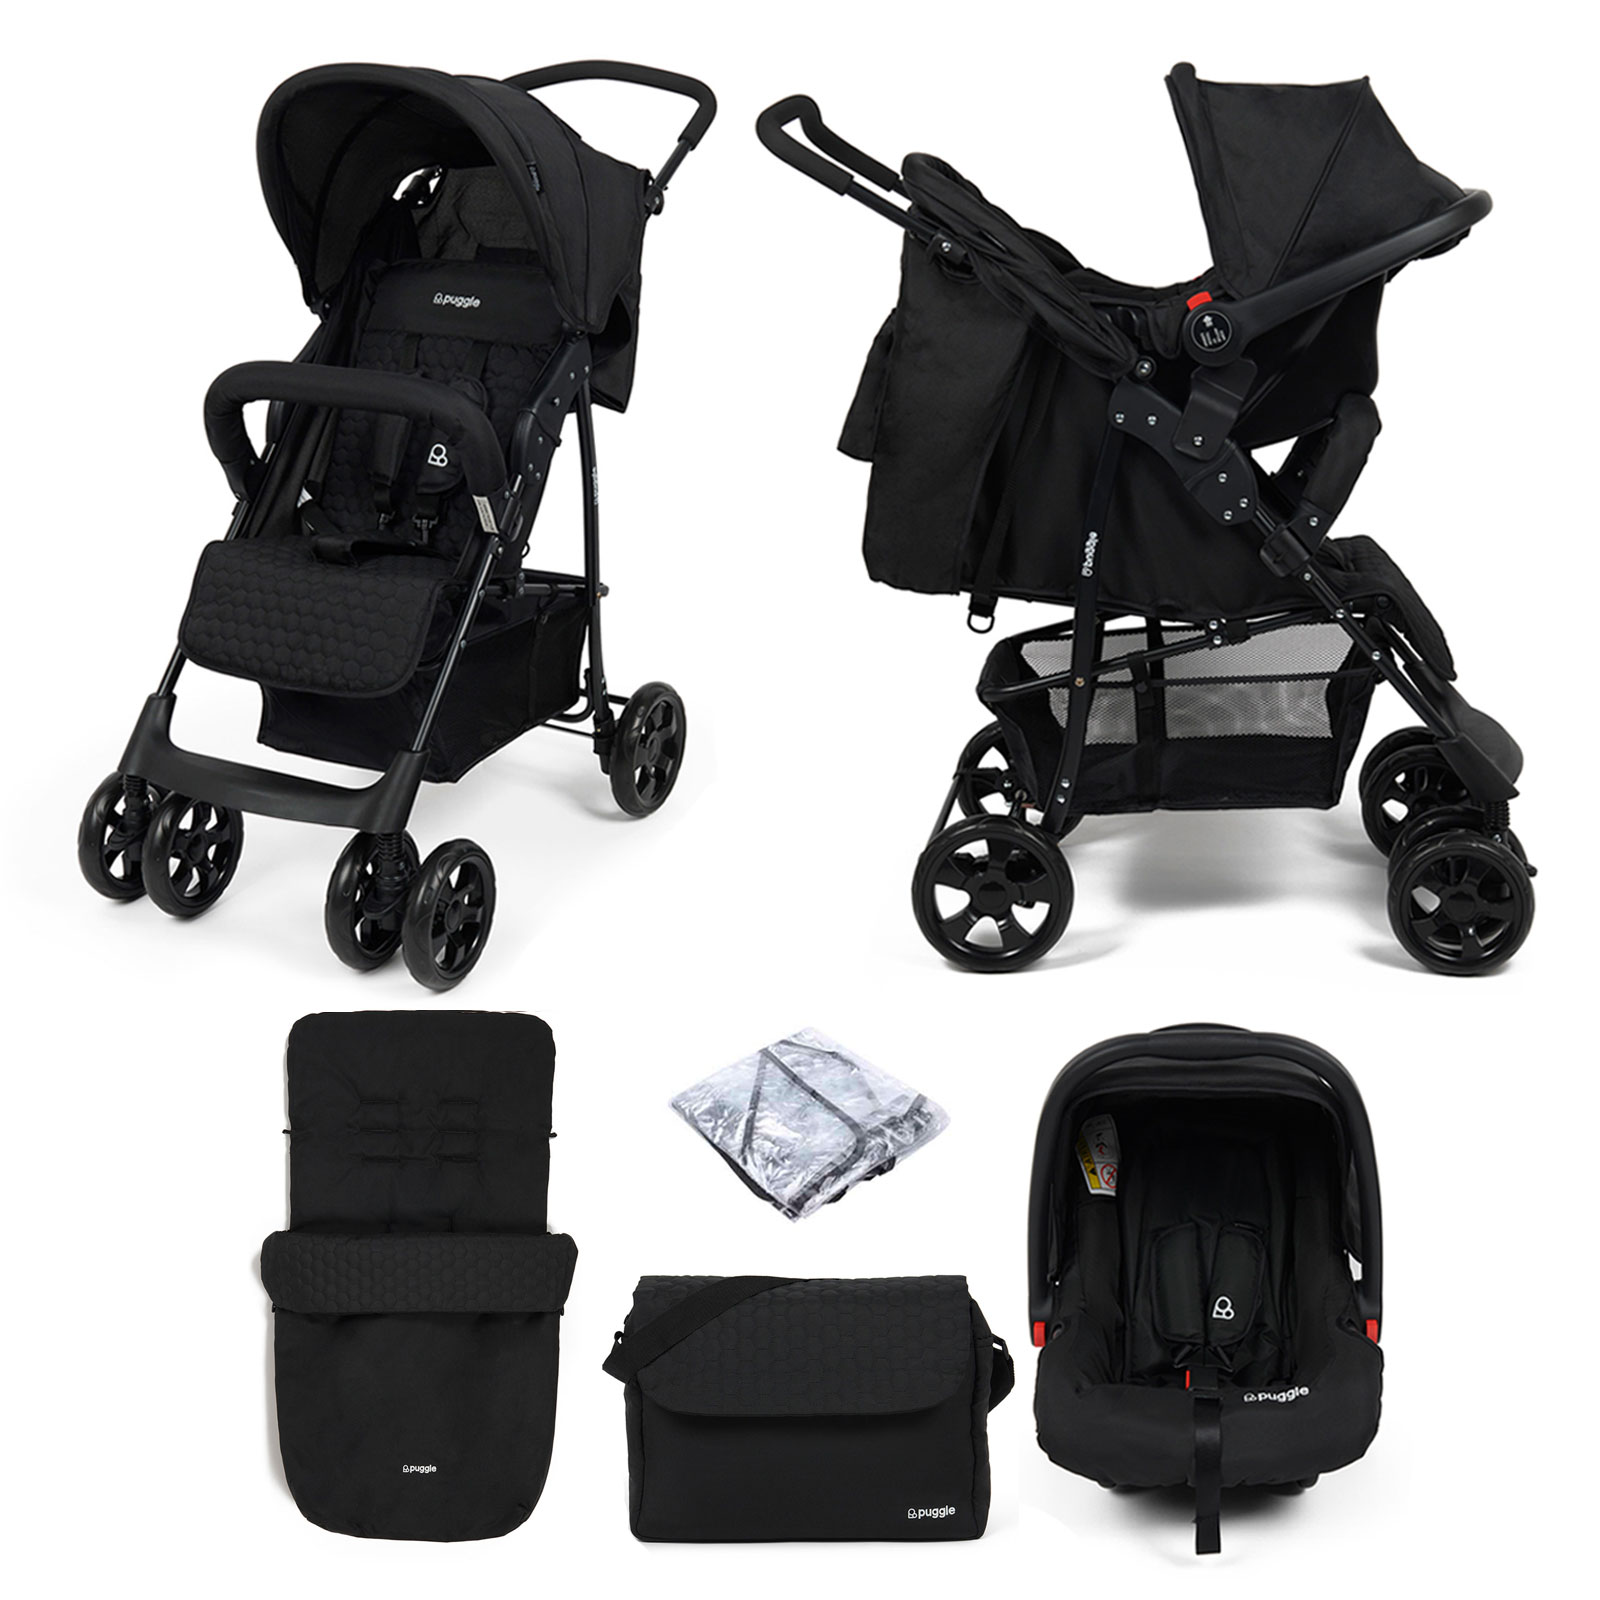 Puggle Lowton Luxe 2in1 Travel System with Raincover, Universal Honeycomb Footmuff & Changing Bag – Storm Black